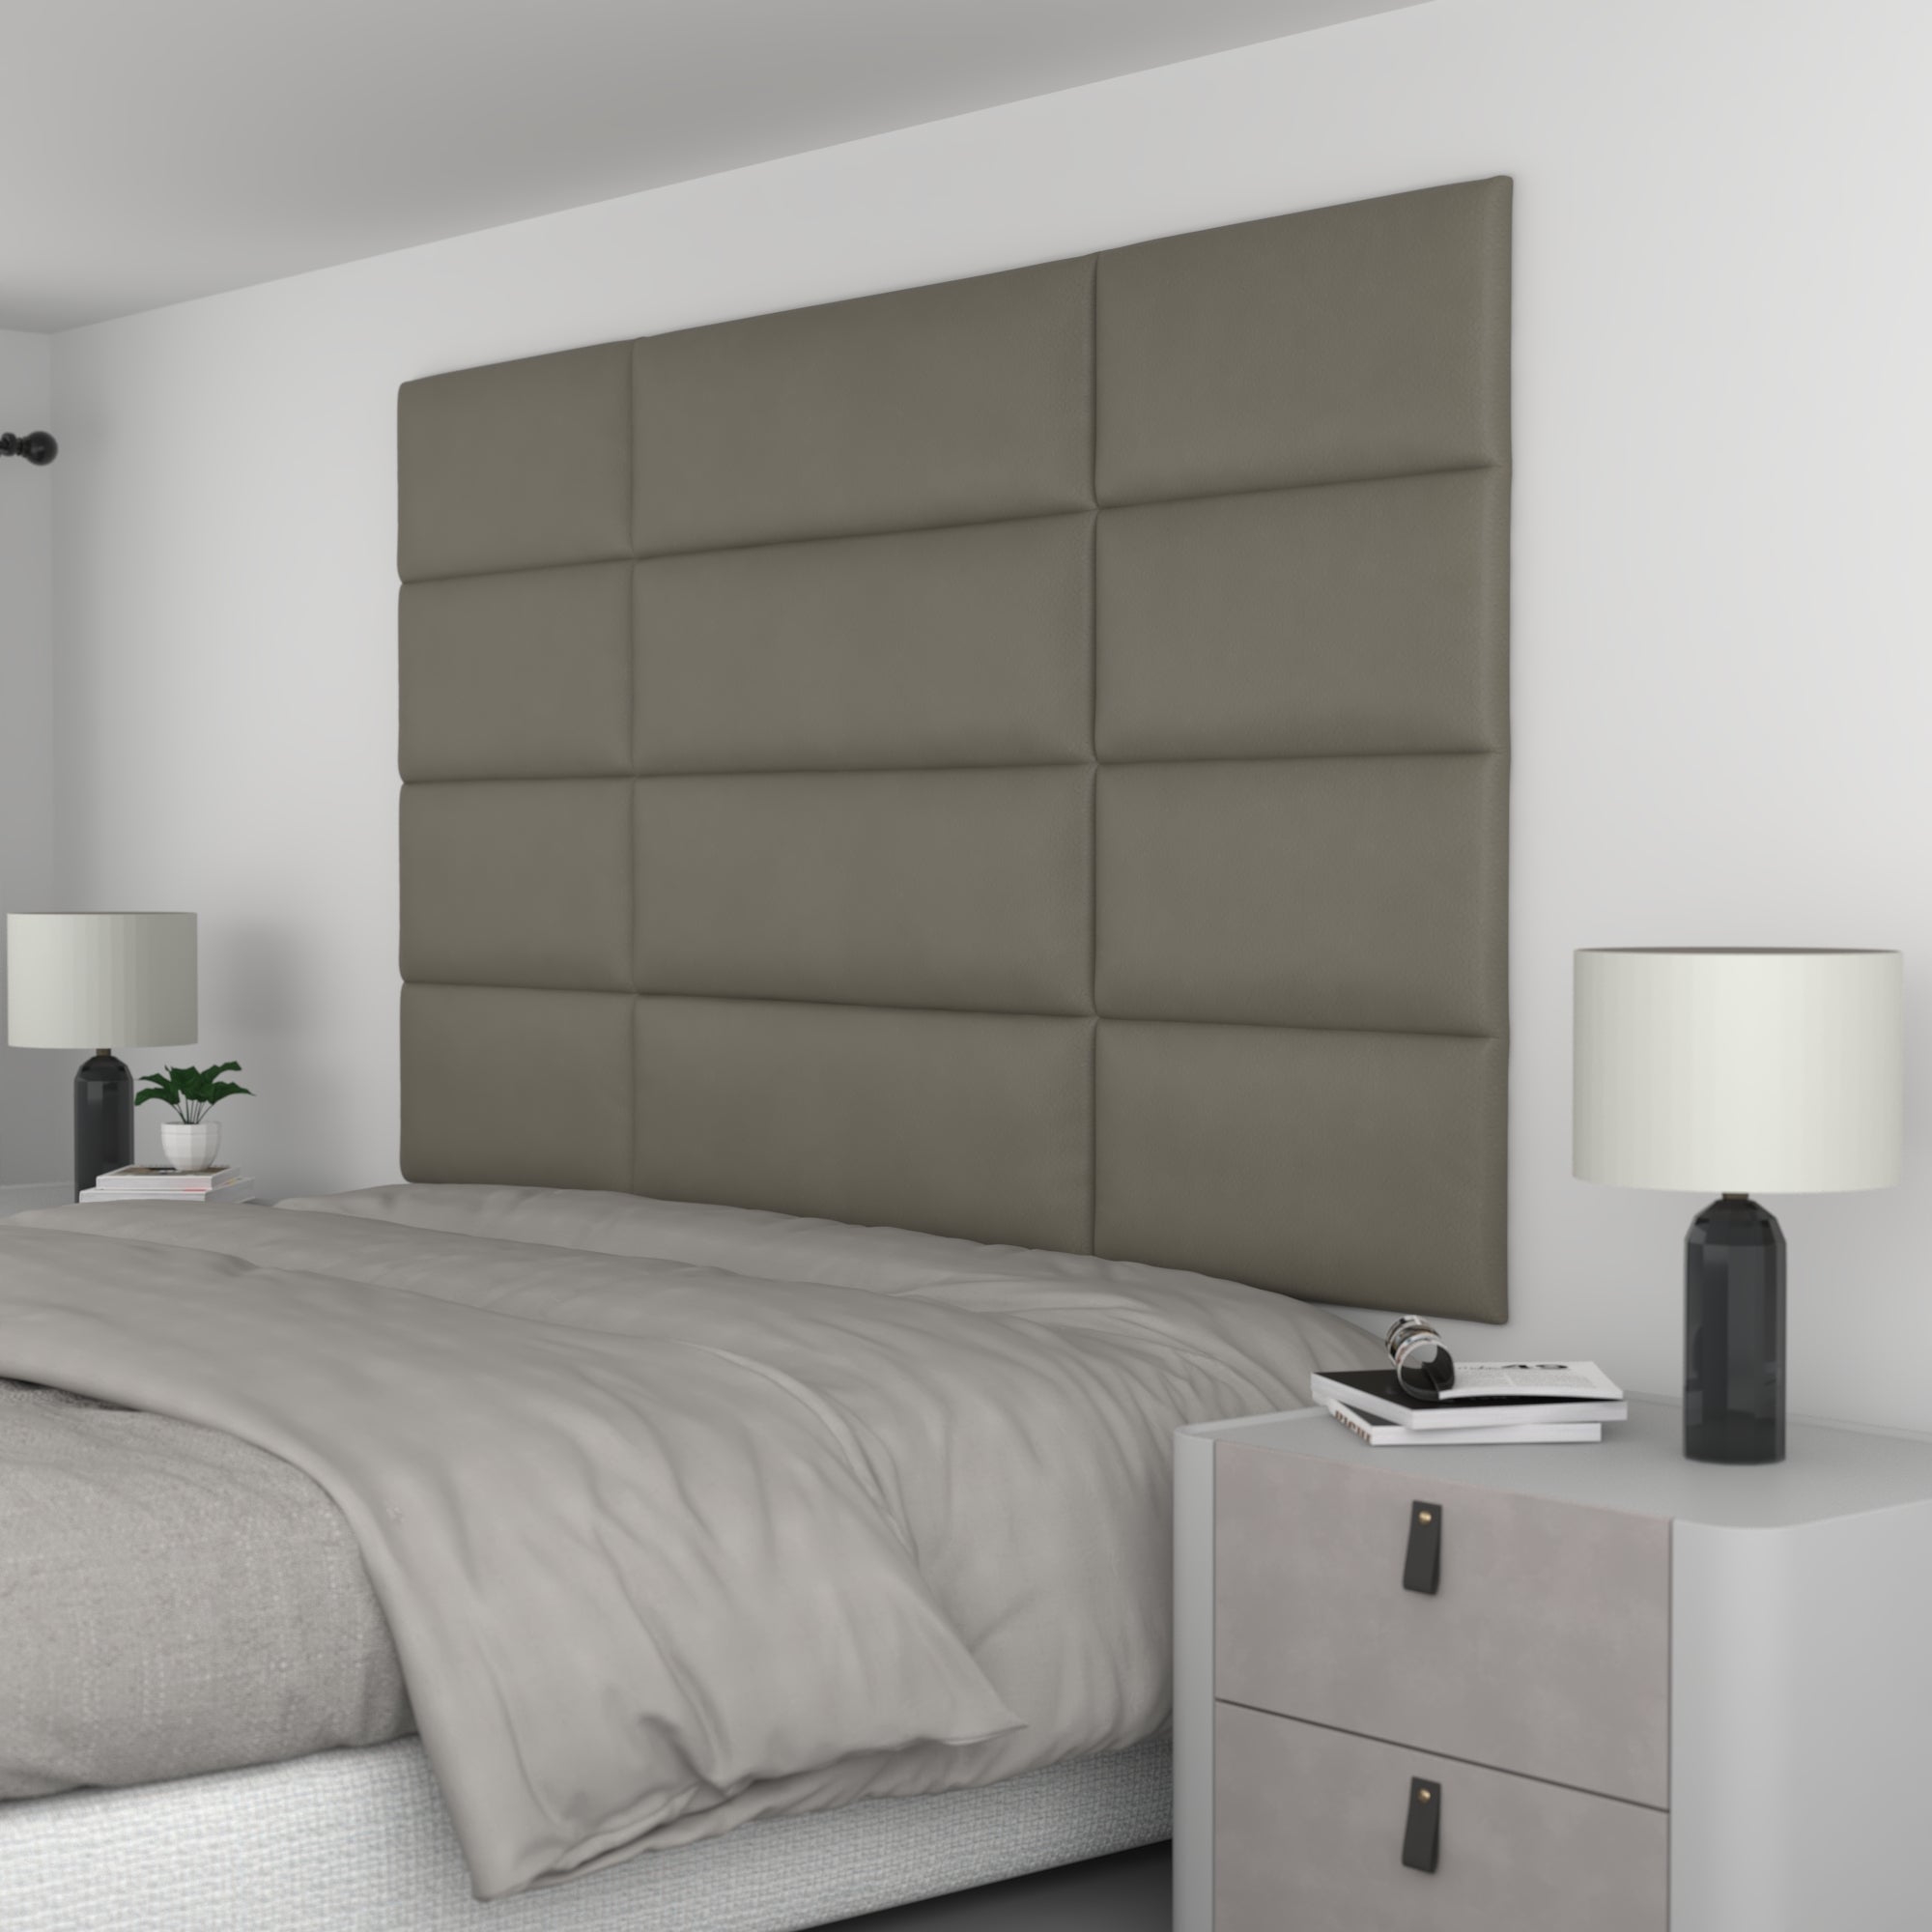 12 Piece Upholstered Wall Panel Headboard Kit 84" x 48" (King Style 3) - Wall Panel Pros